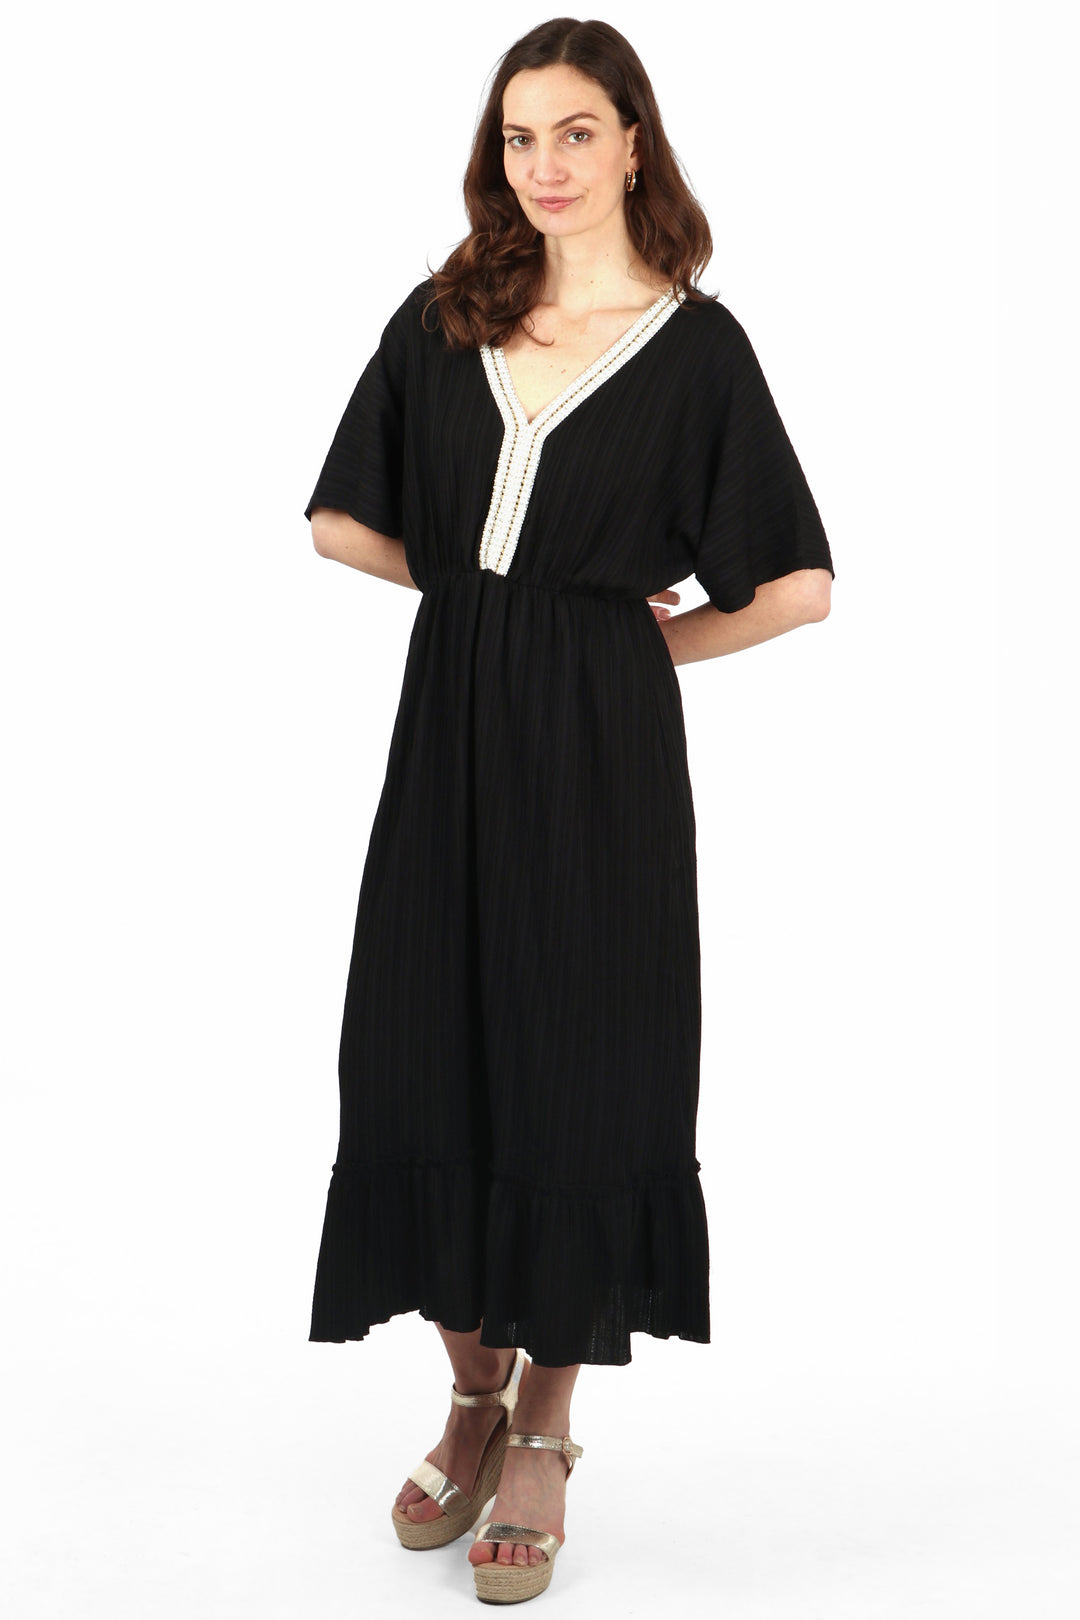 model wearing a midi length 3/4 sleeve black dress with a v neck, there is white and gold robe trim around the v neck